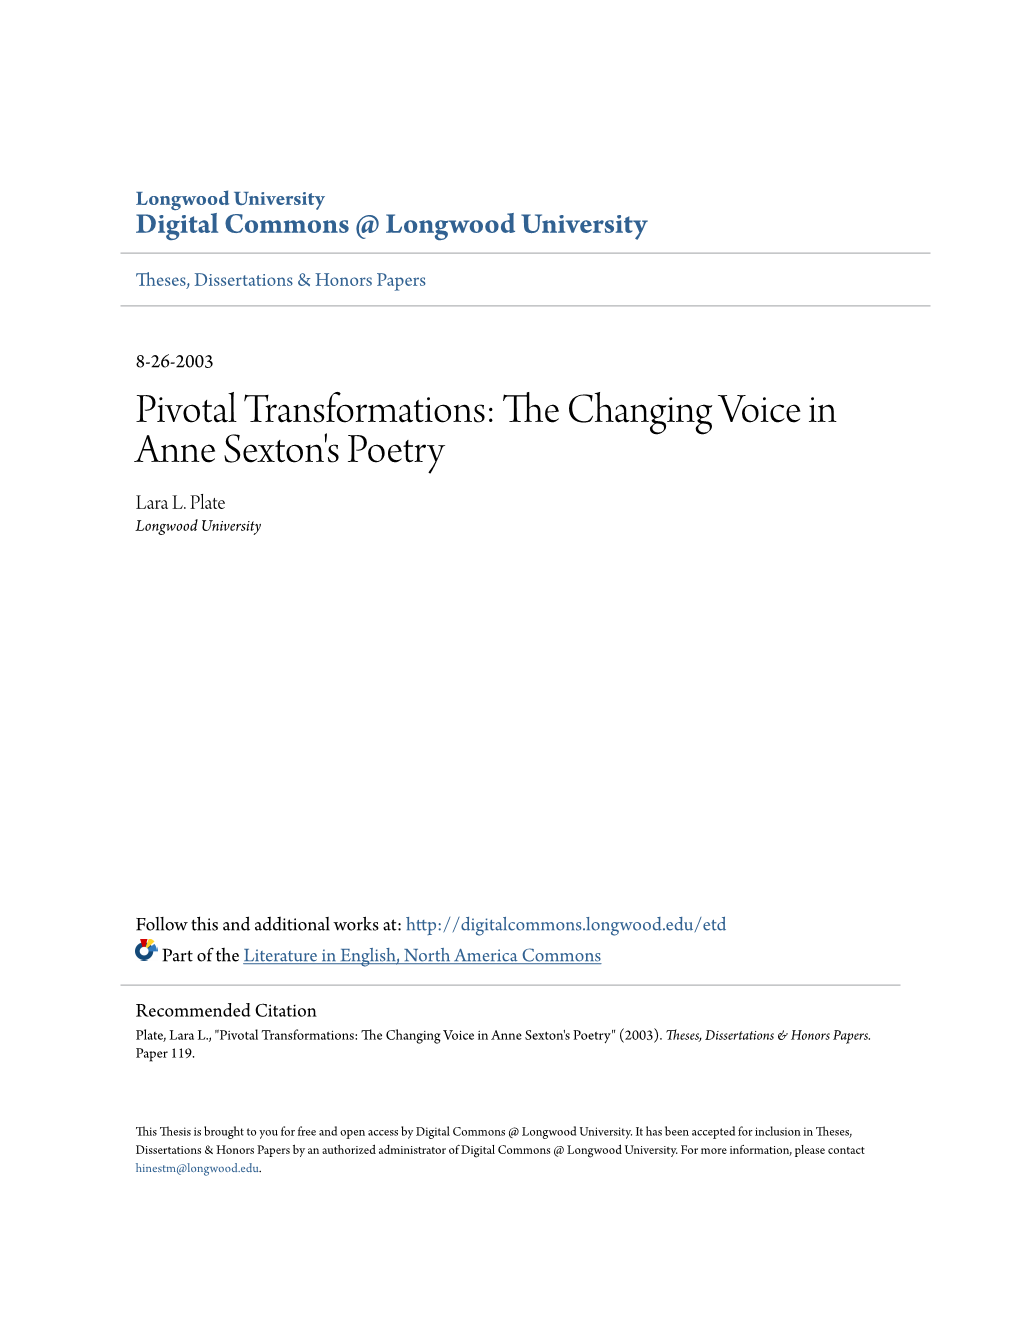 The Changing Voice in Anne Sexton's Poetry